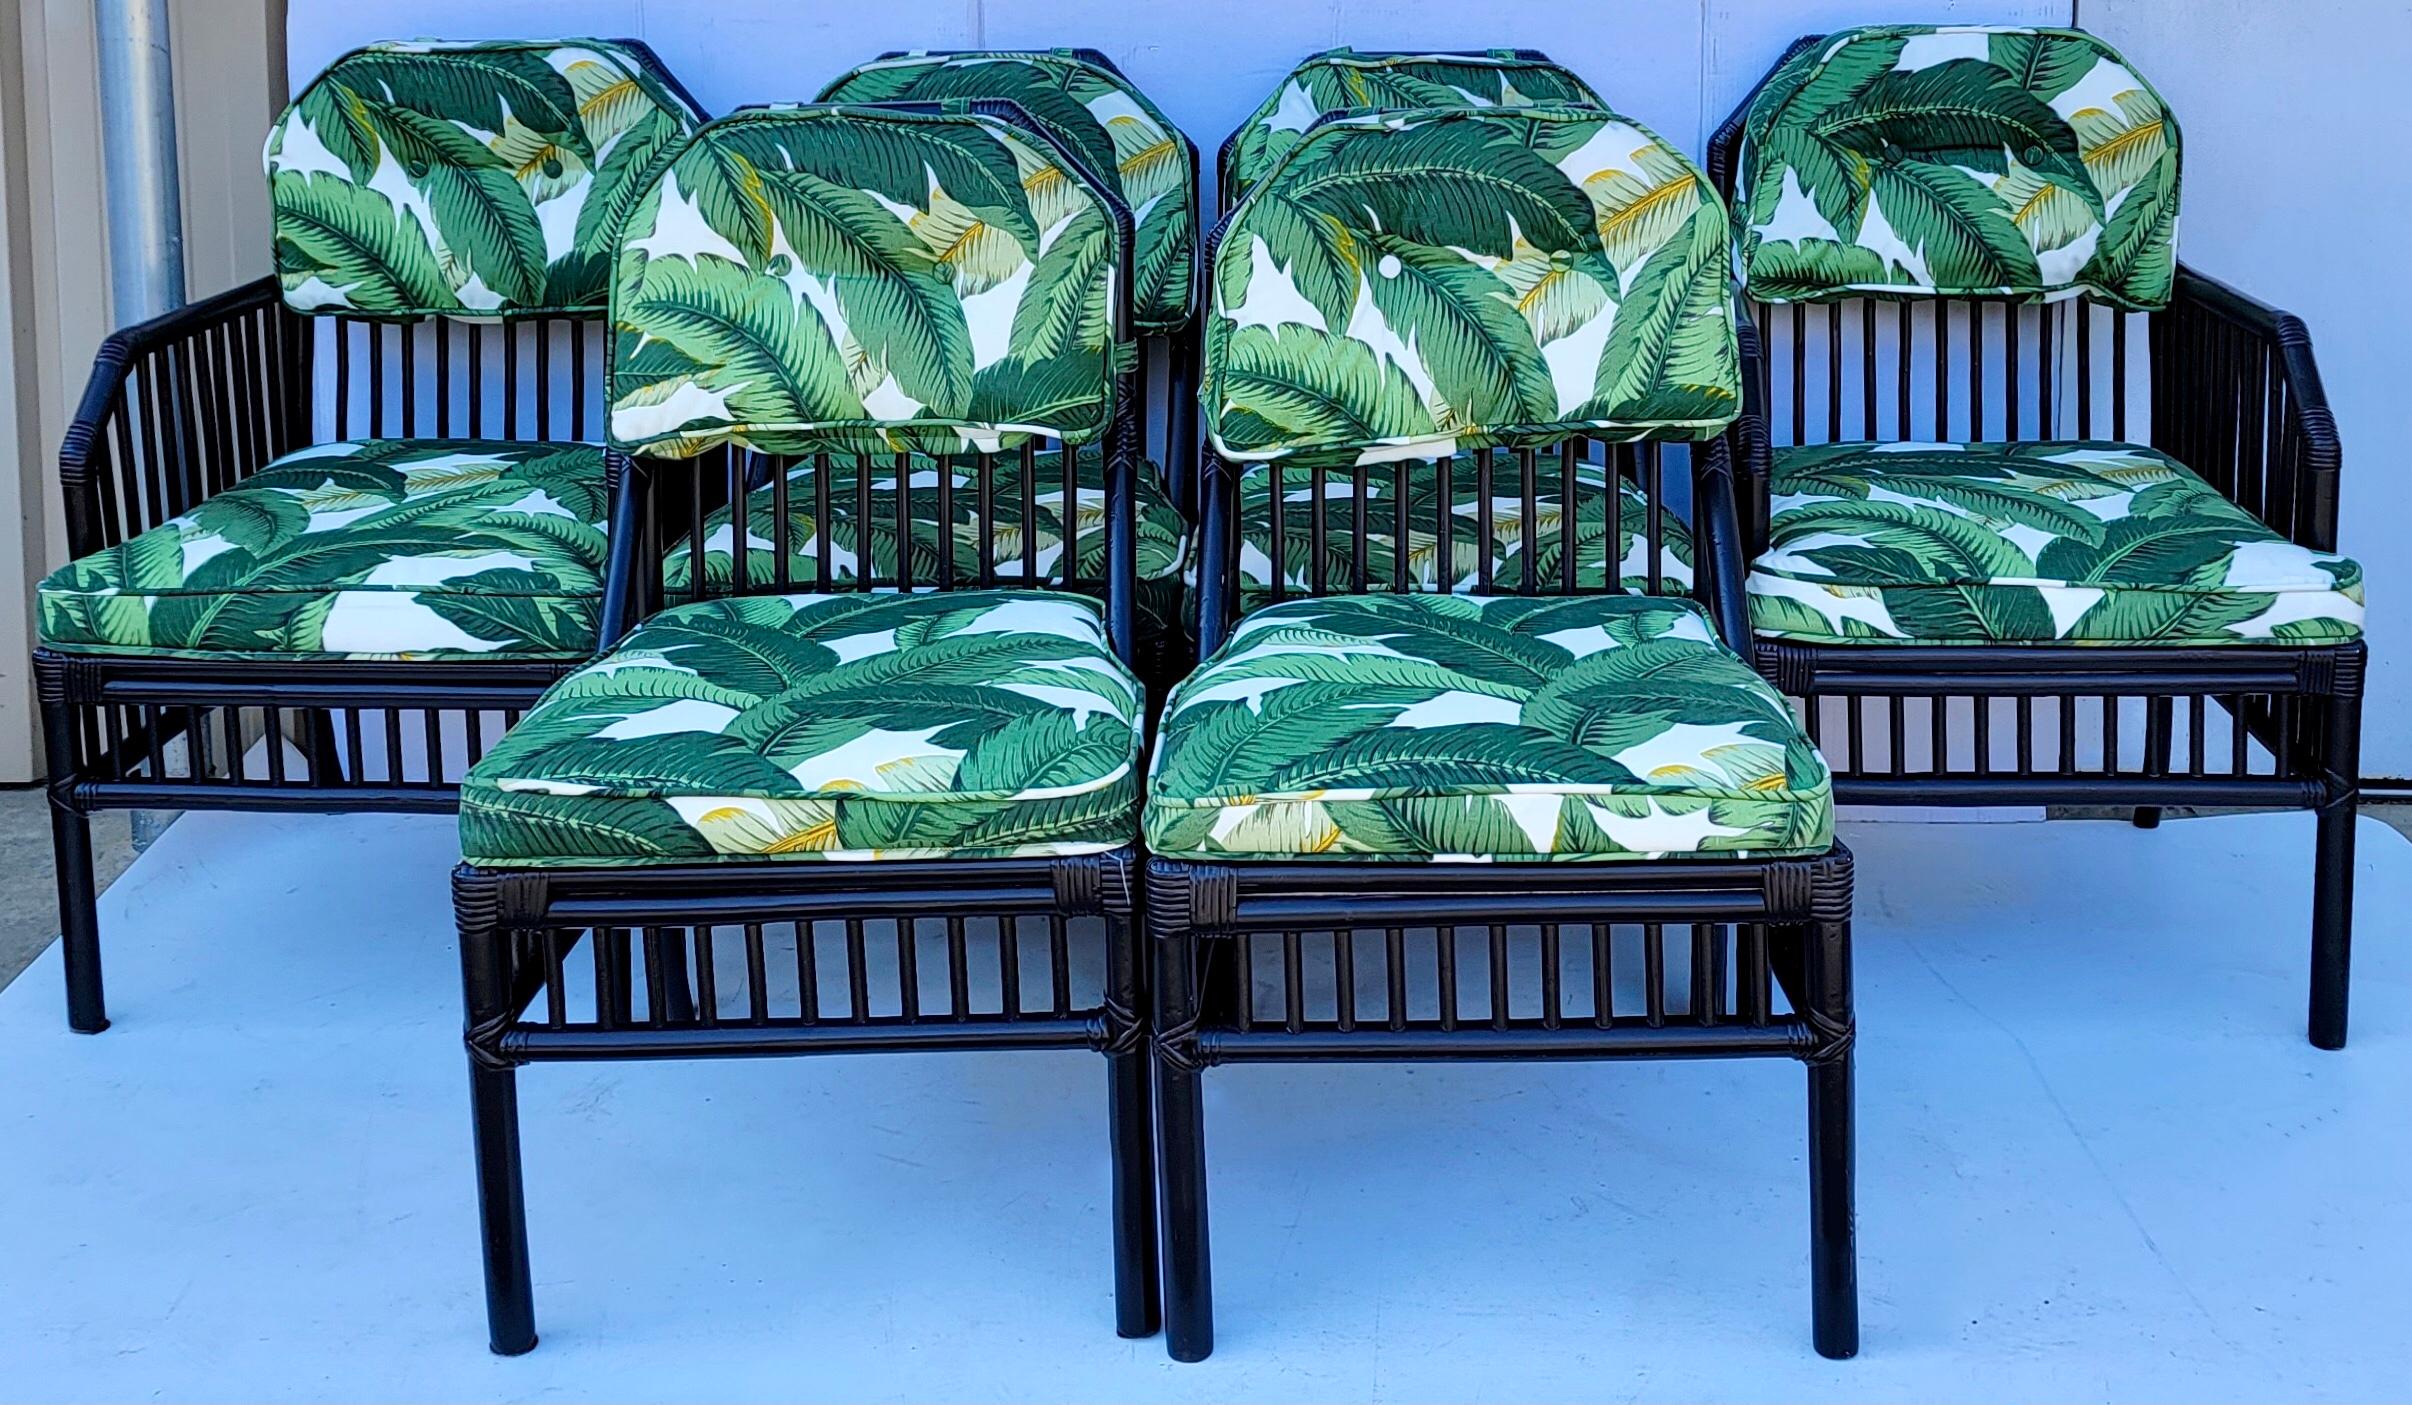 Black Ficks Reed Rattan Dining Chairs in Tropical Banana Leaf Fabric, Set of 6 1